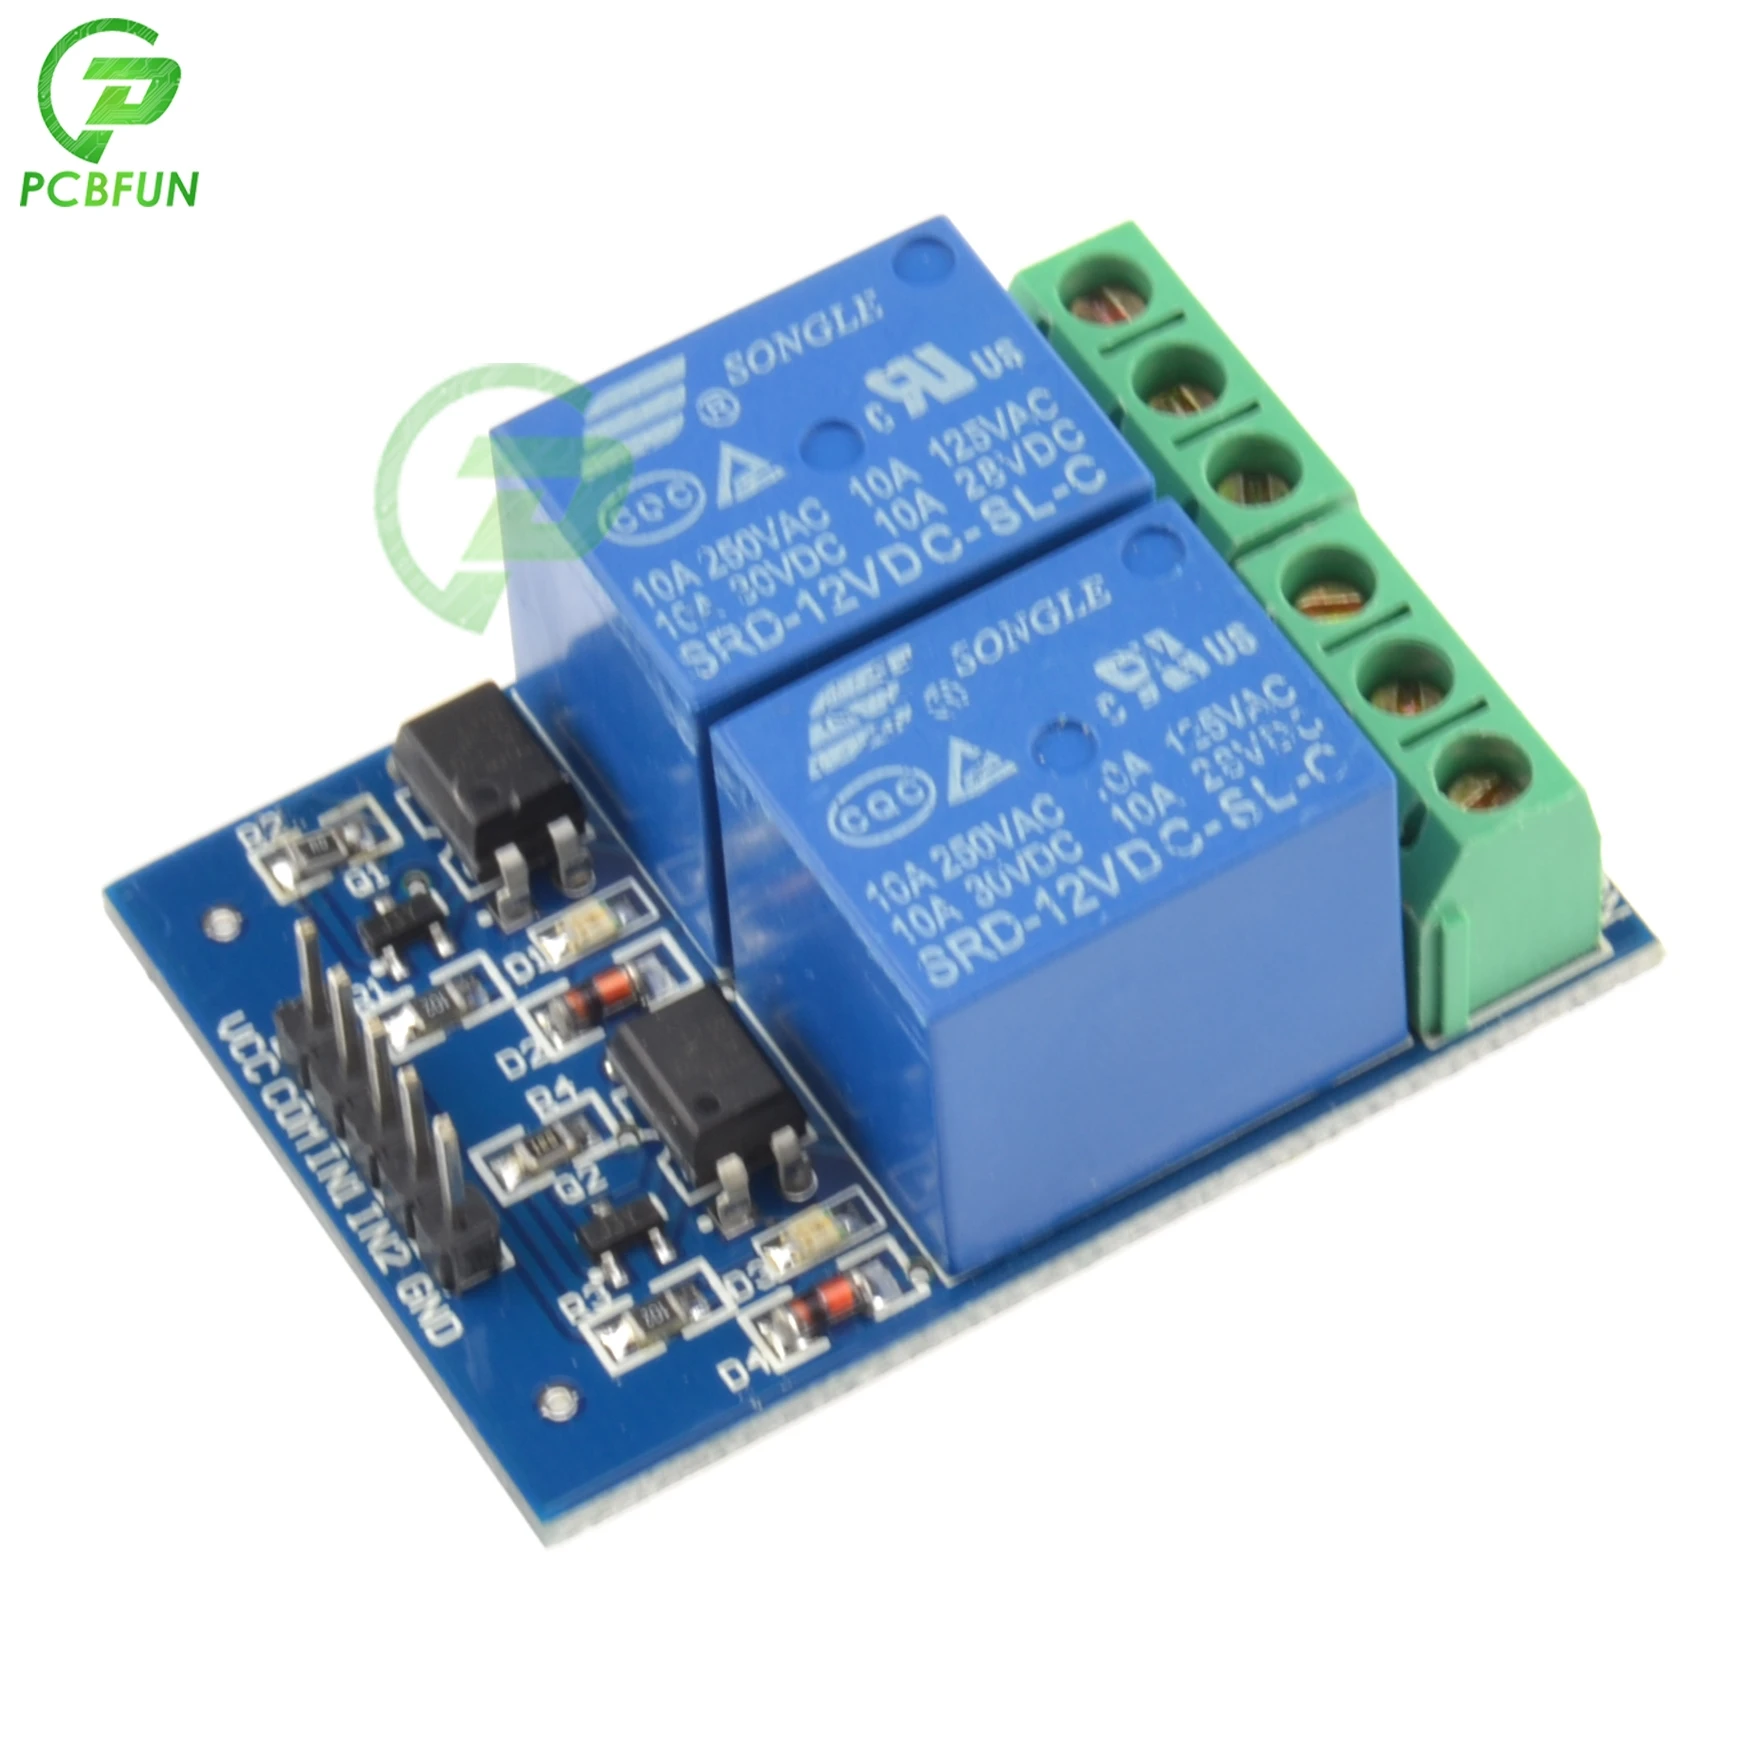 12V 2CH Relay Module Board Anti-jamming with EL817 Optocoupler 100,000 times For PIC AVR DSP ARM For Arduino Microcontroller I/O